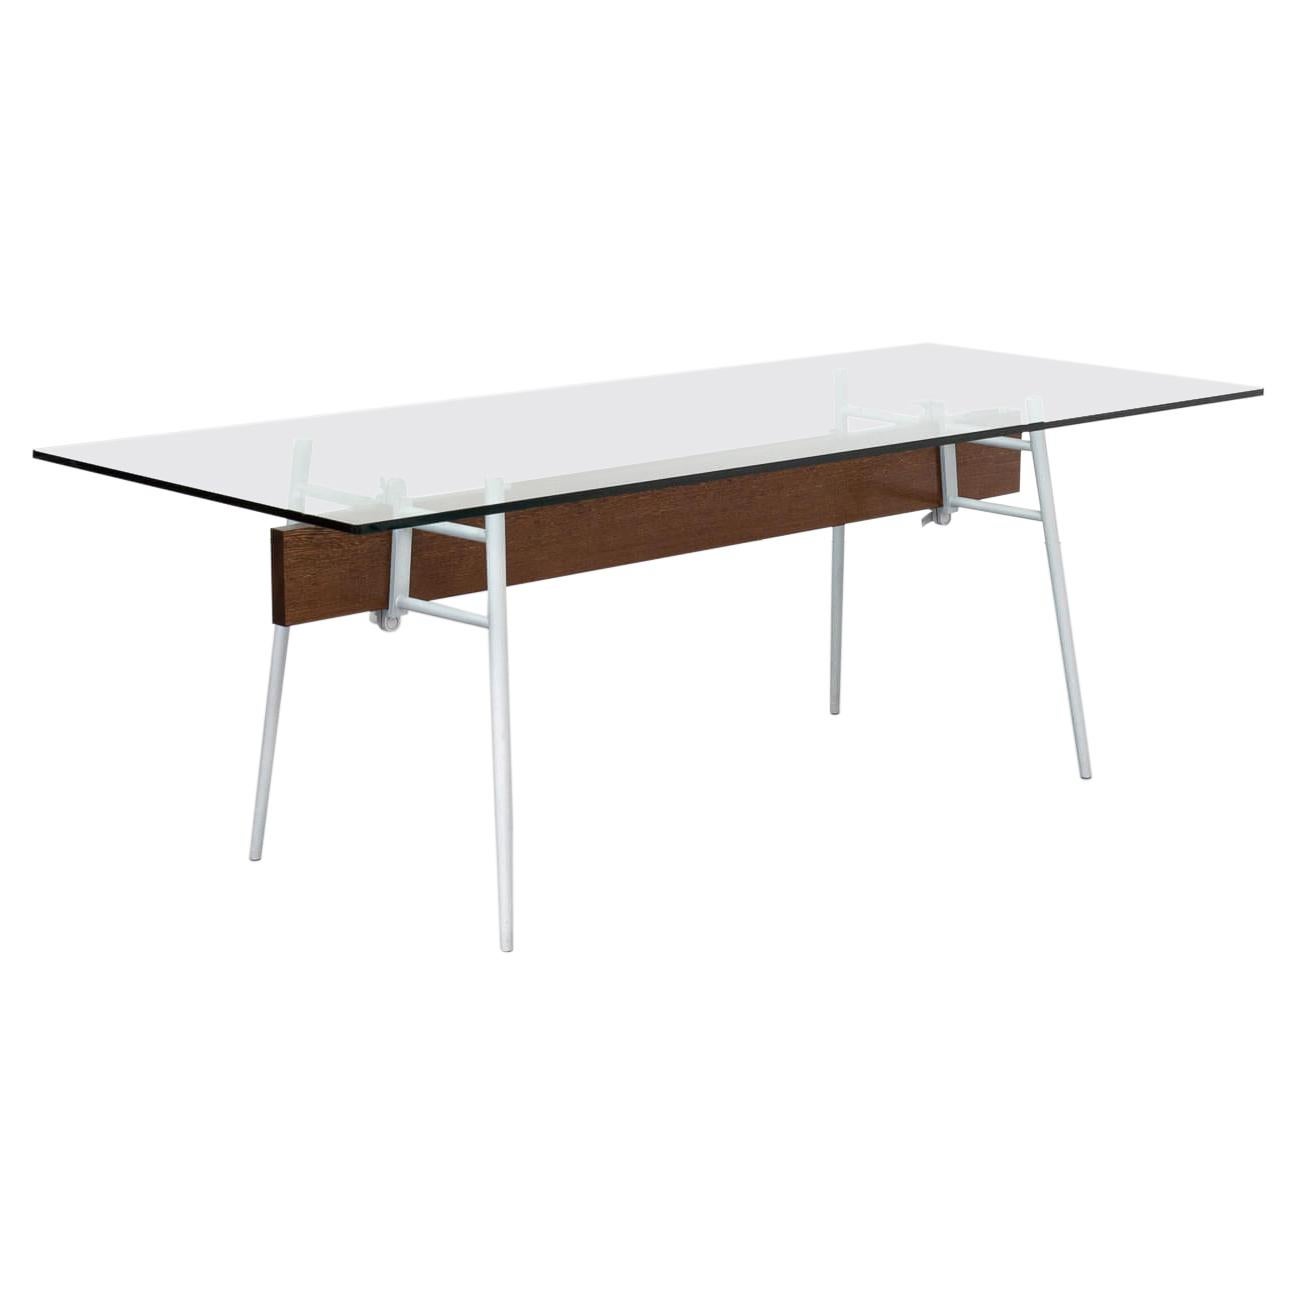 90s Philippe Starck ‘M.T. Minimum’ Glass Dining Table for Cassina For Sale